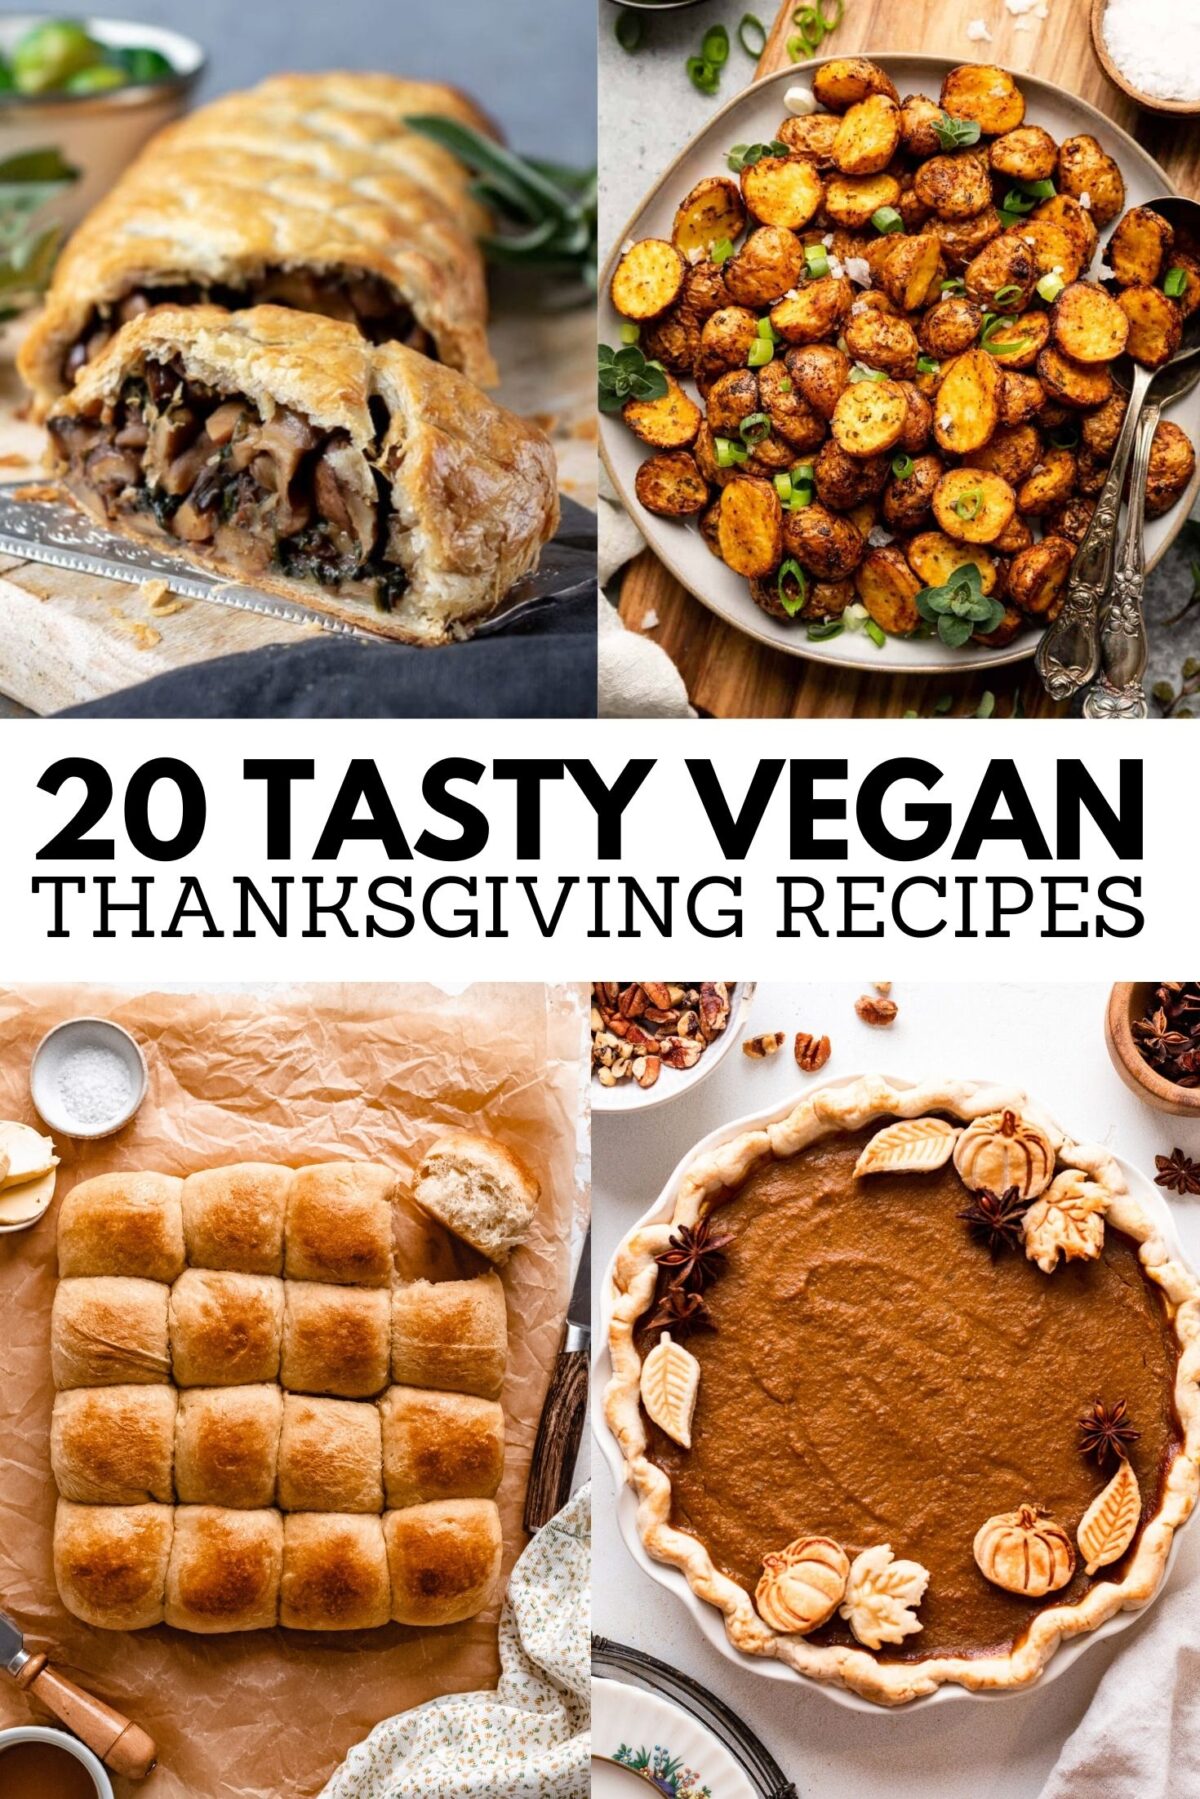 Get creative in the kitchen this holiday season with these plant-based recipes! These vegan Thanksgiving dishes are sure to please!